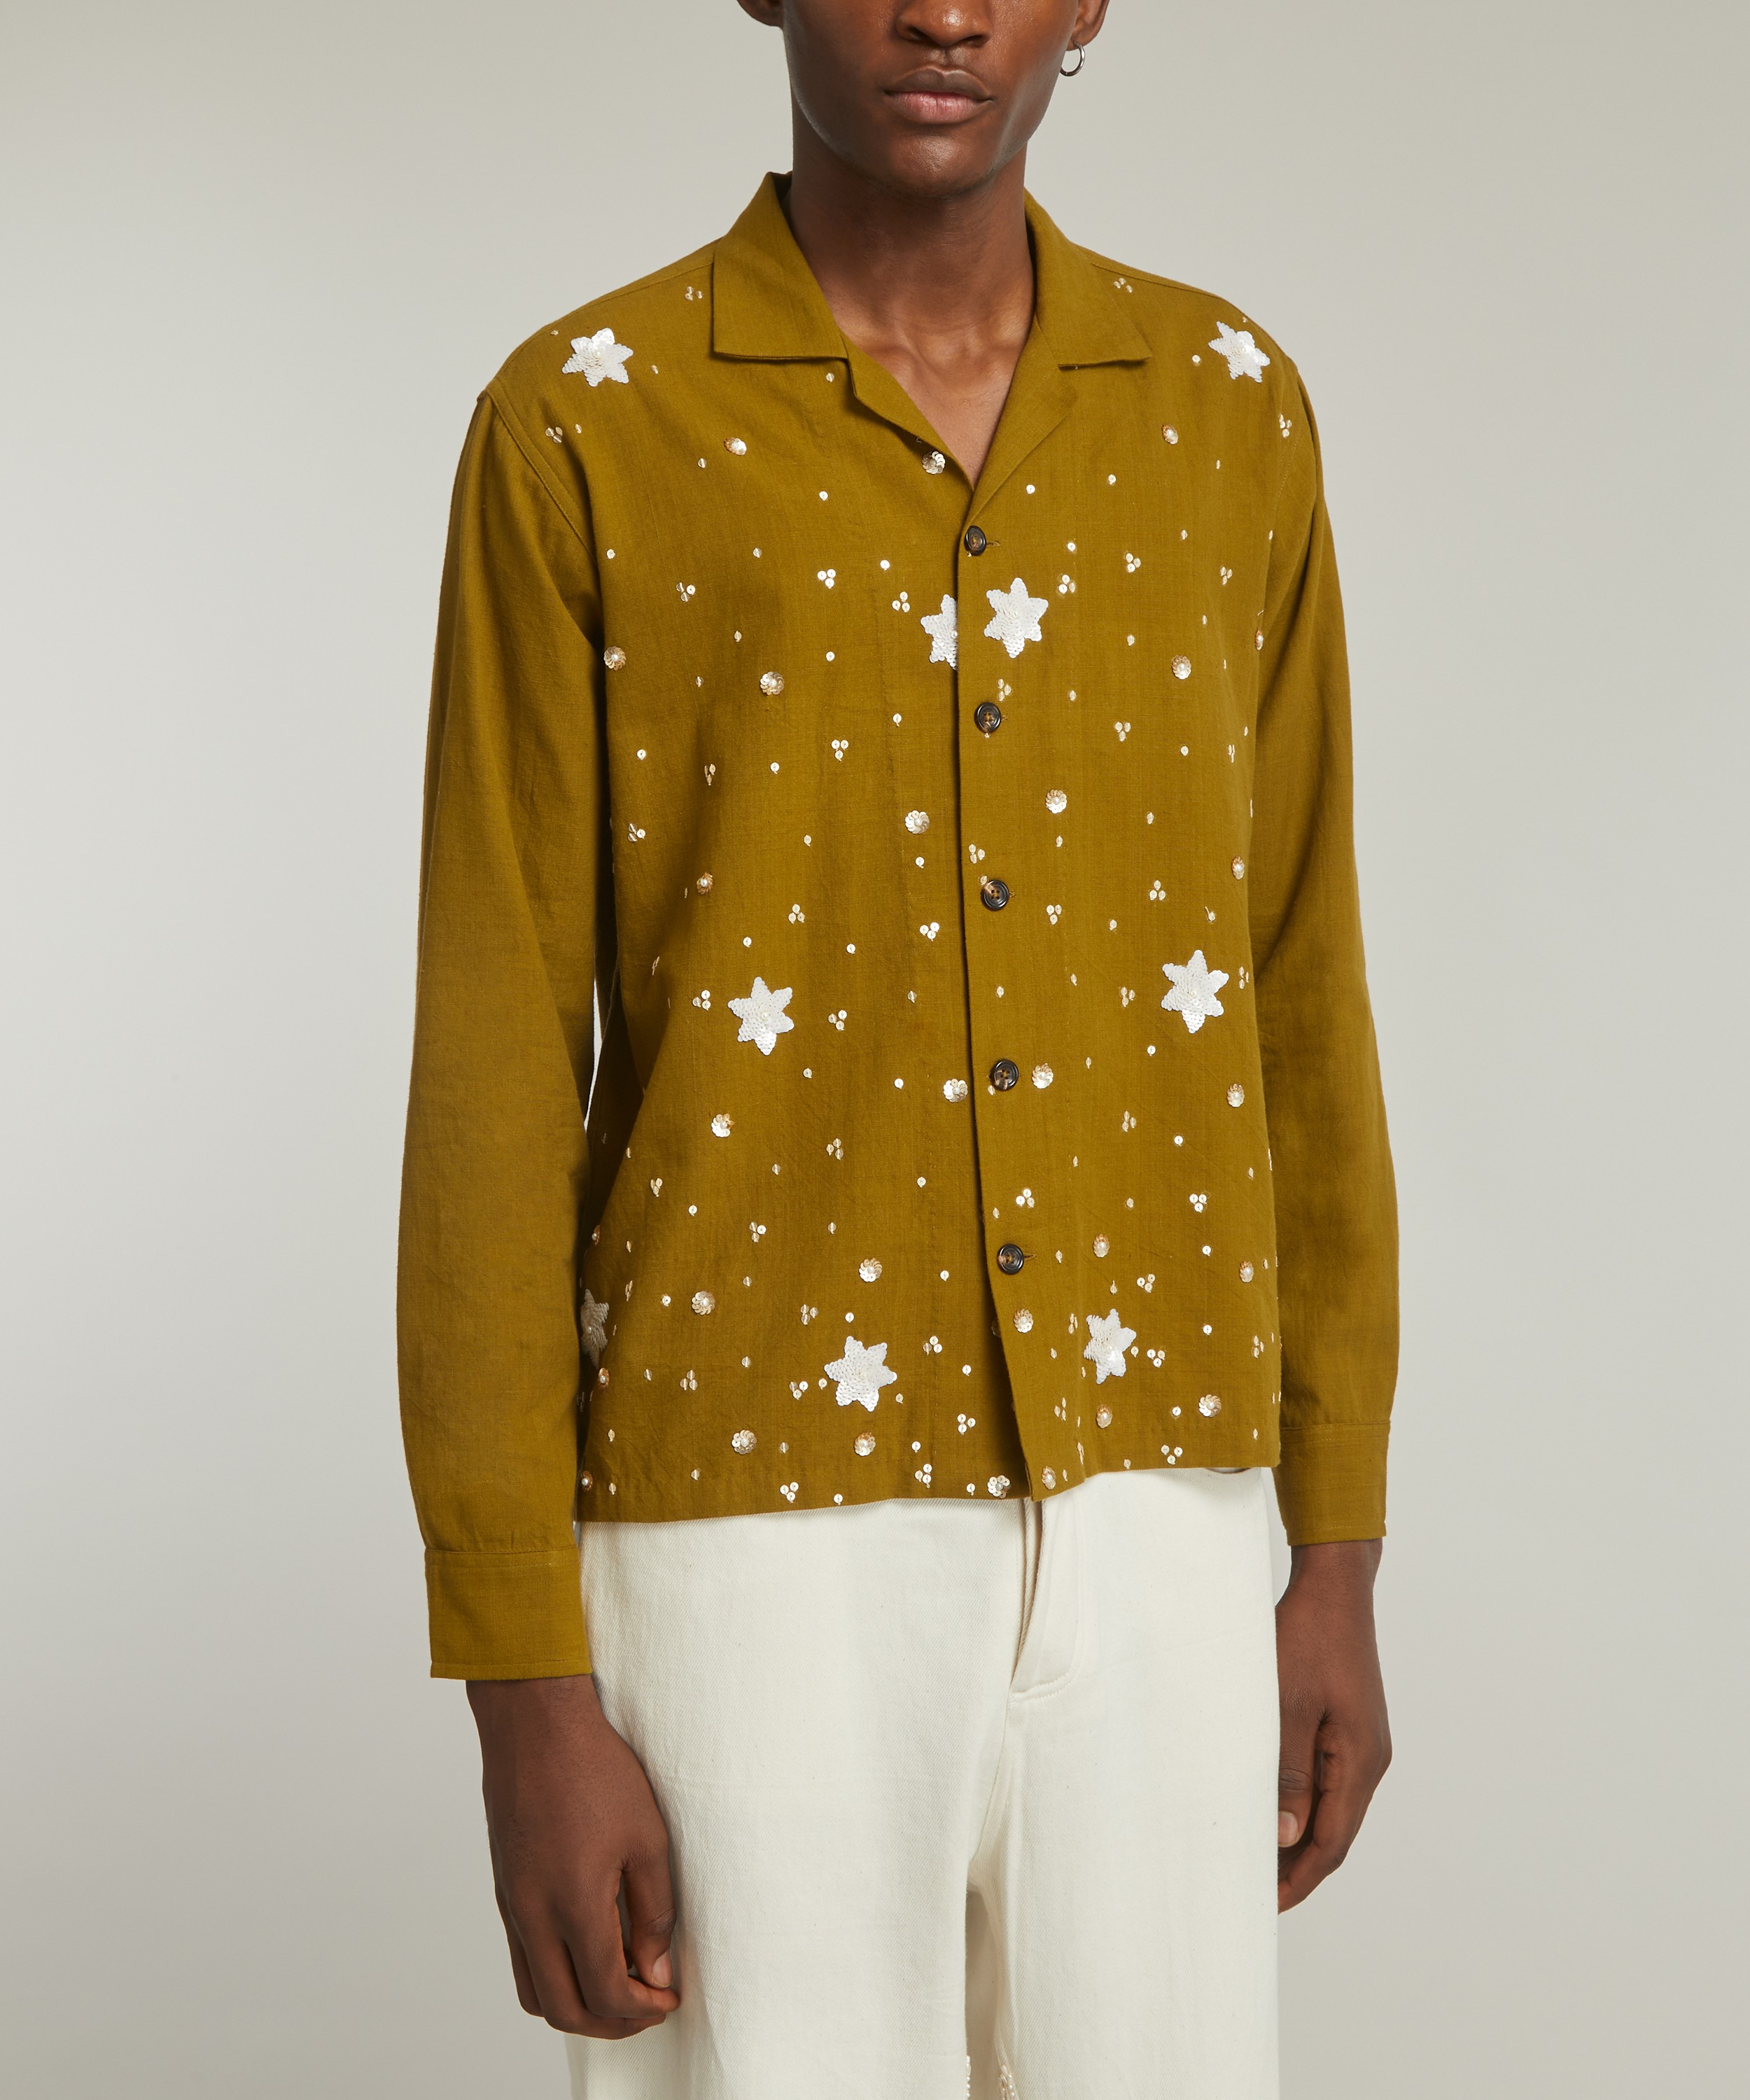 Kartik Research - Hand Embroidered Flowers Long-Sleeve Shirt image number 2